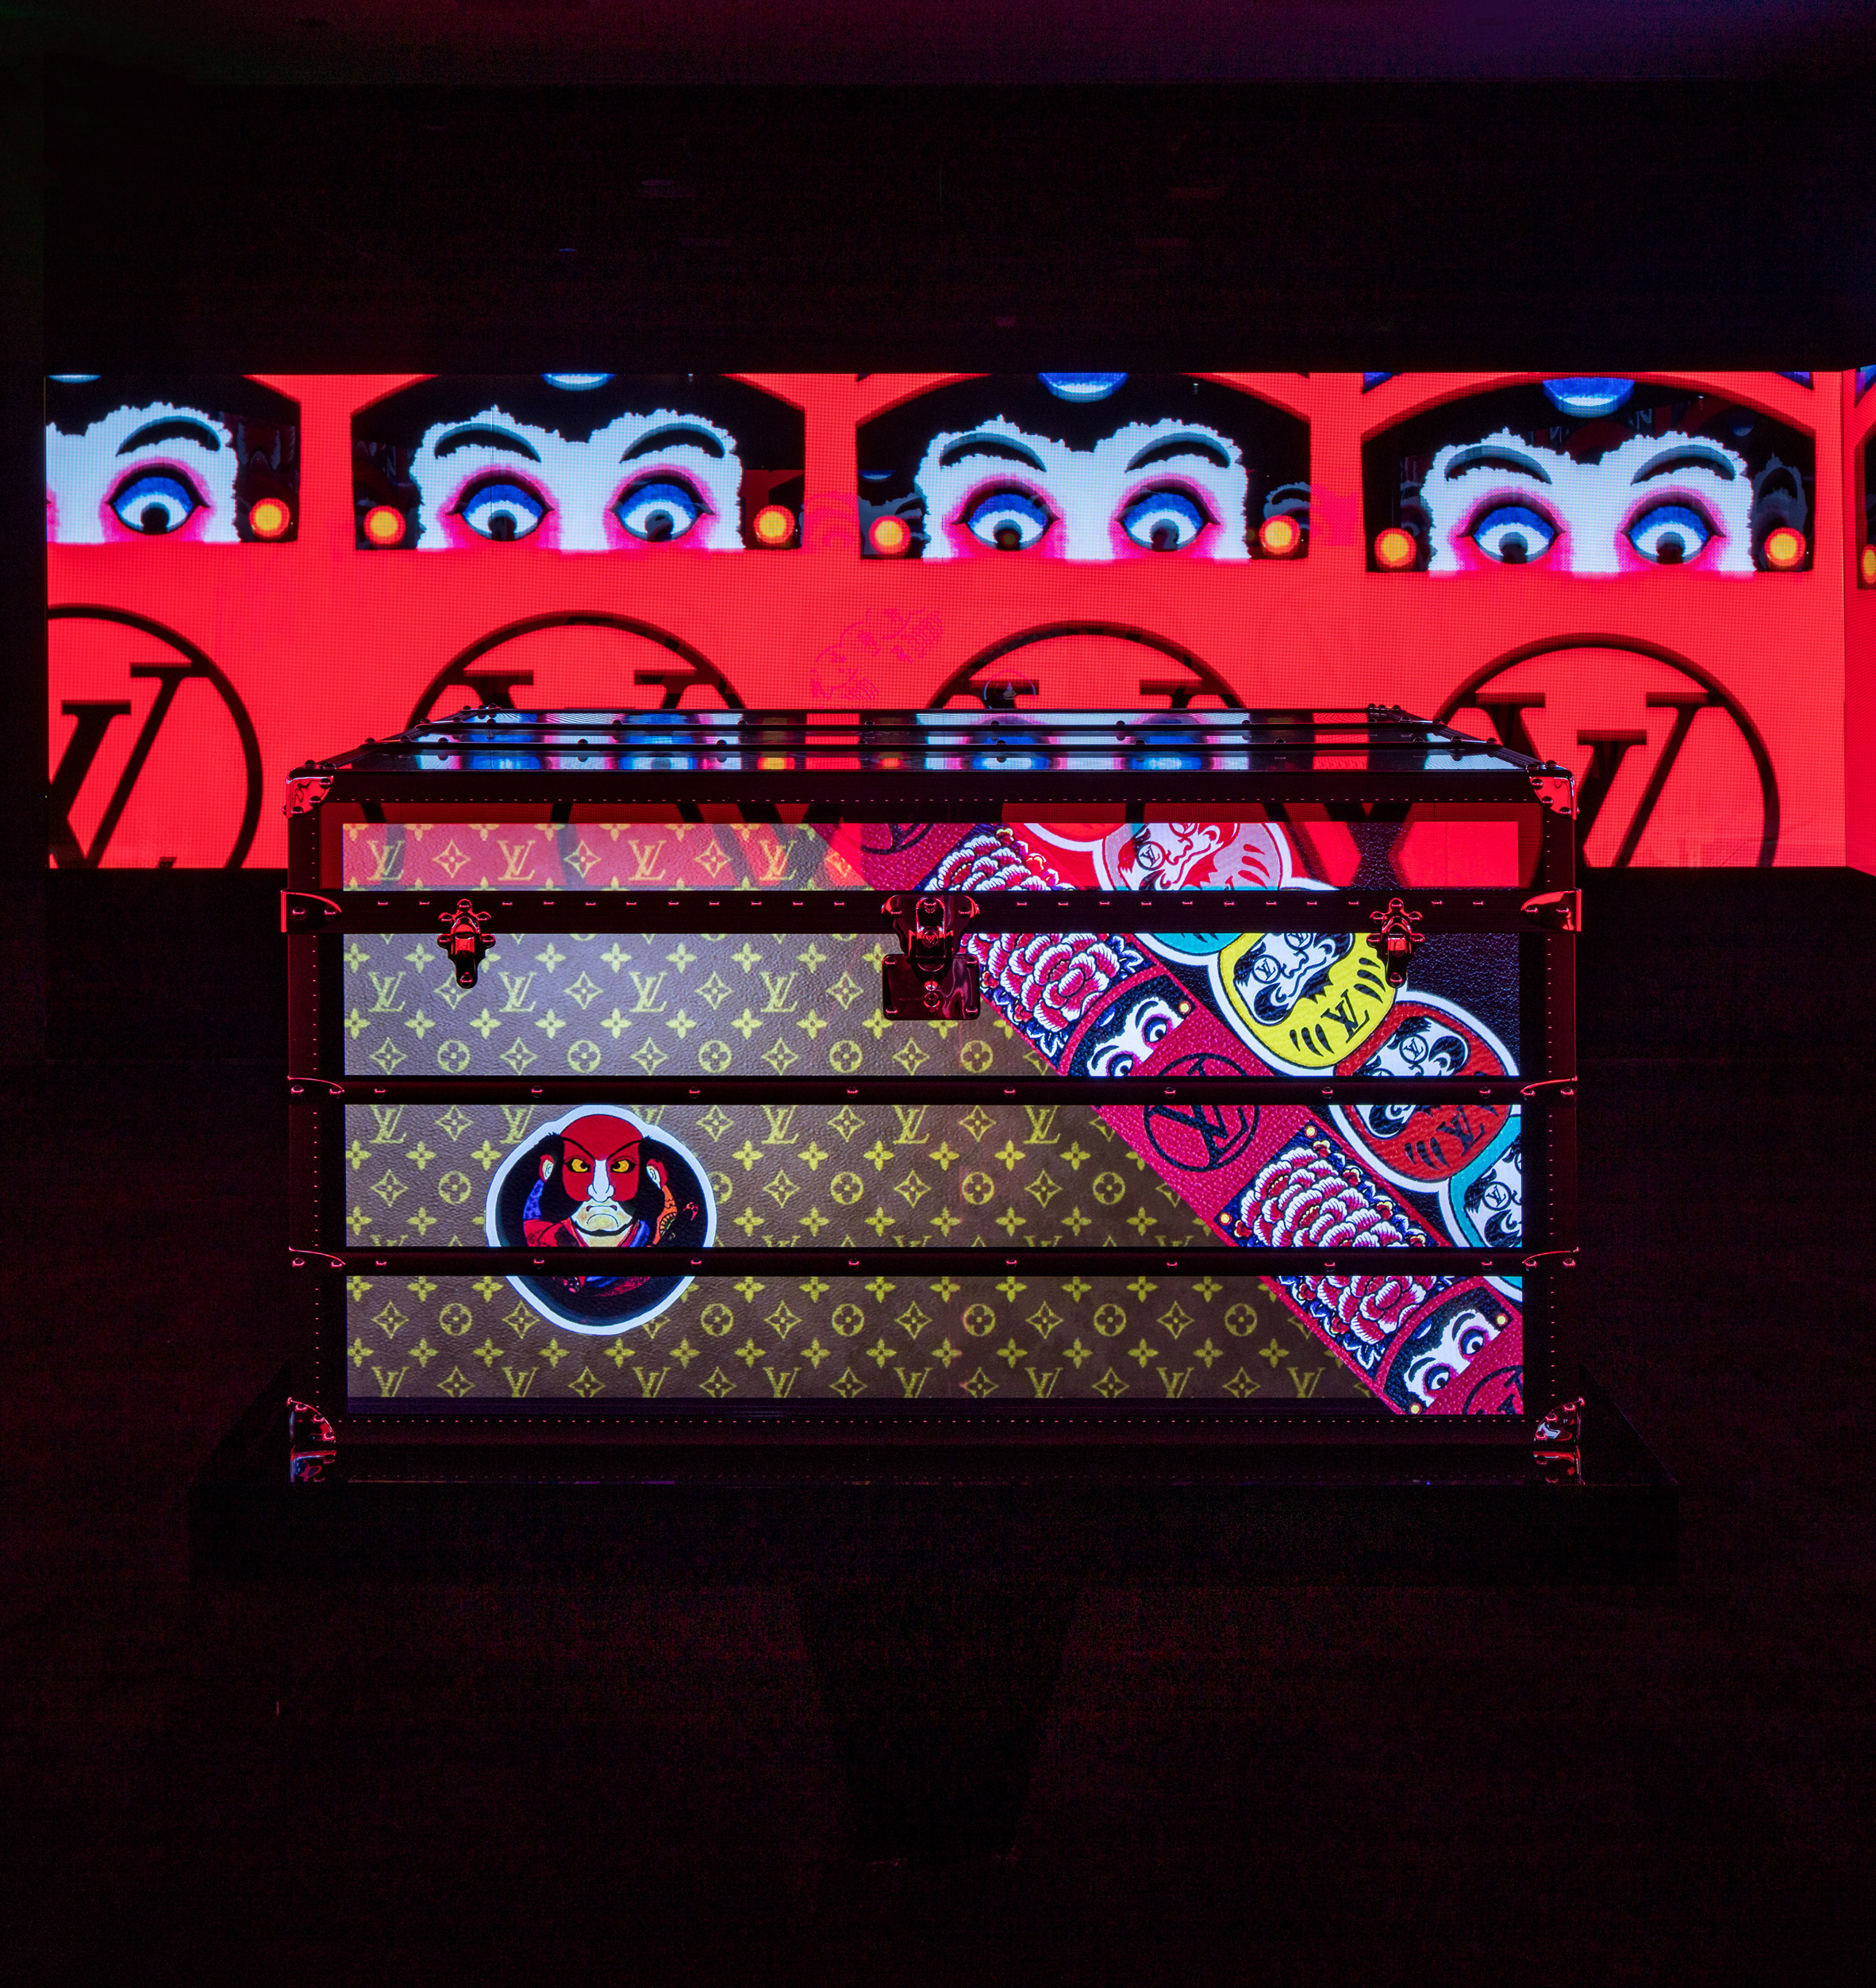 Fashion powerhouse Louis Vuitton extends brand experience to refurbishment  hoarding with LUMEX® G